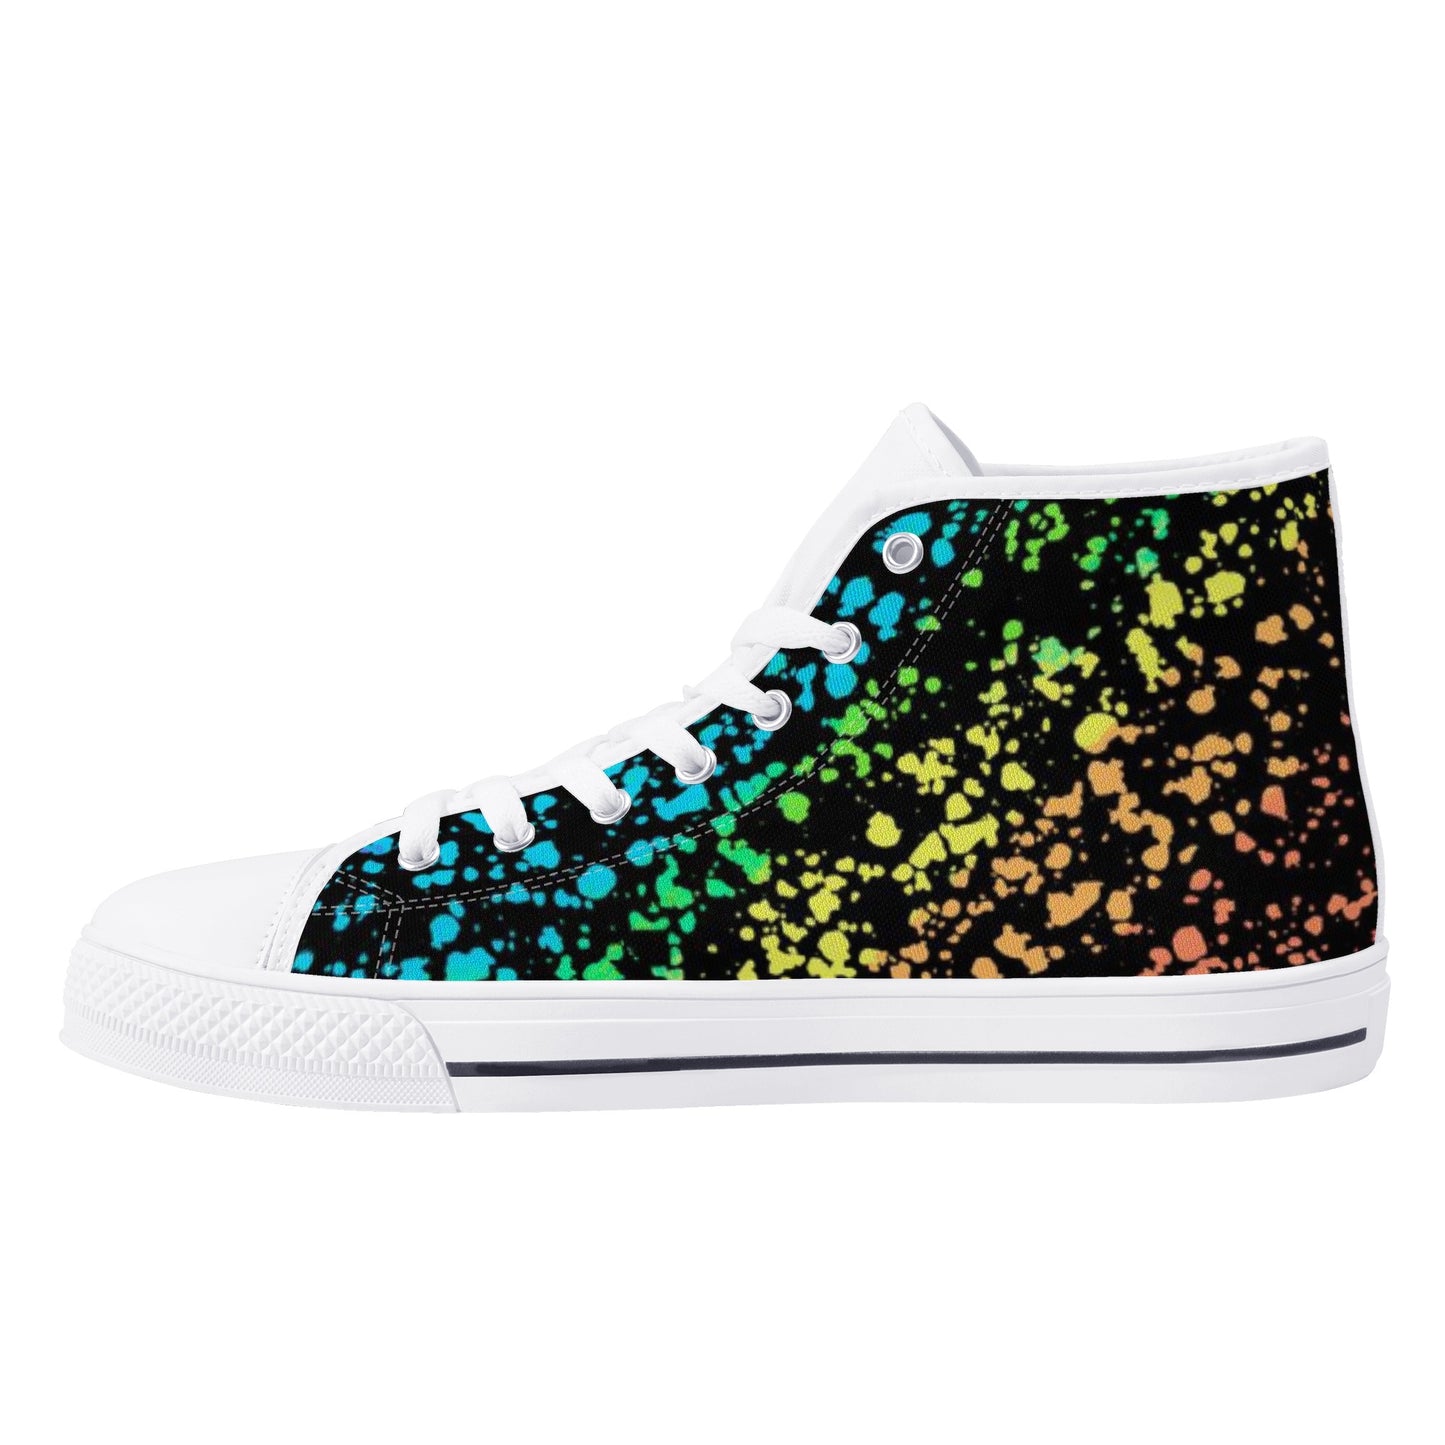 Rainbow Paint Spattered Men High Top Shoes, Lace Up Sneakers Black White Footwear Rave Canvas Streetwear Designer Gift Idea Starcove Fashion